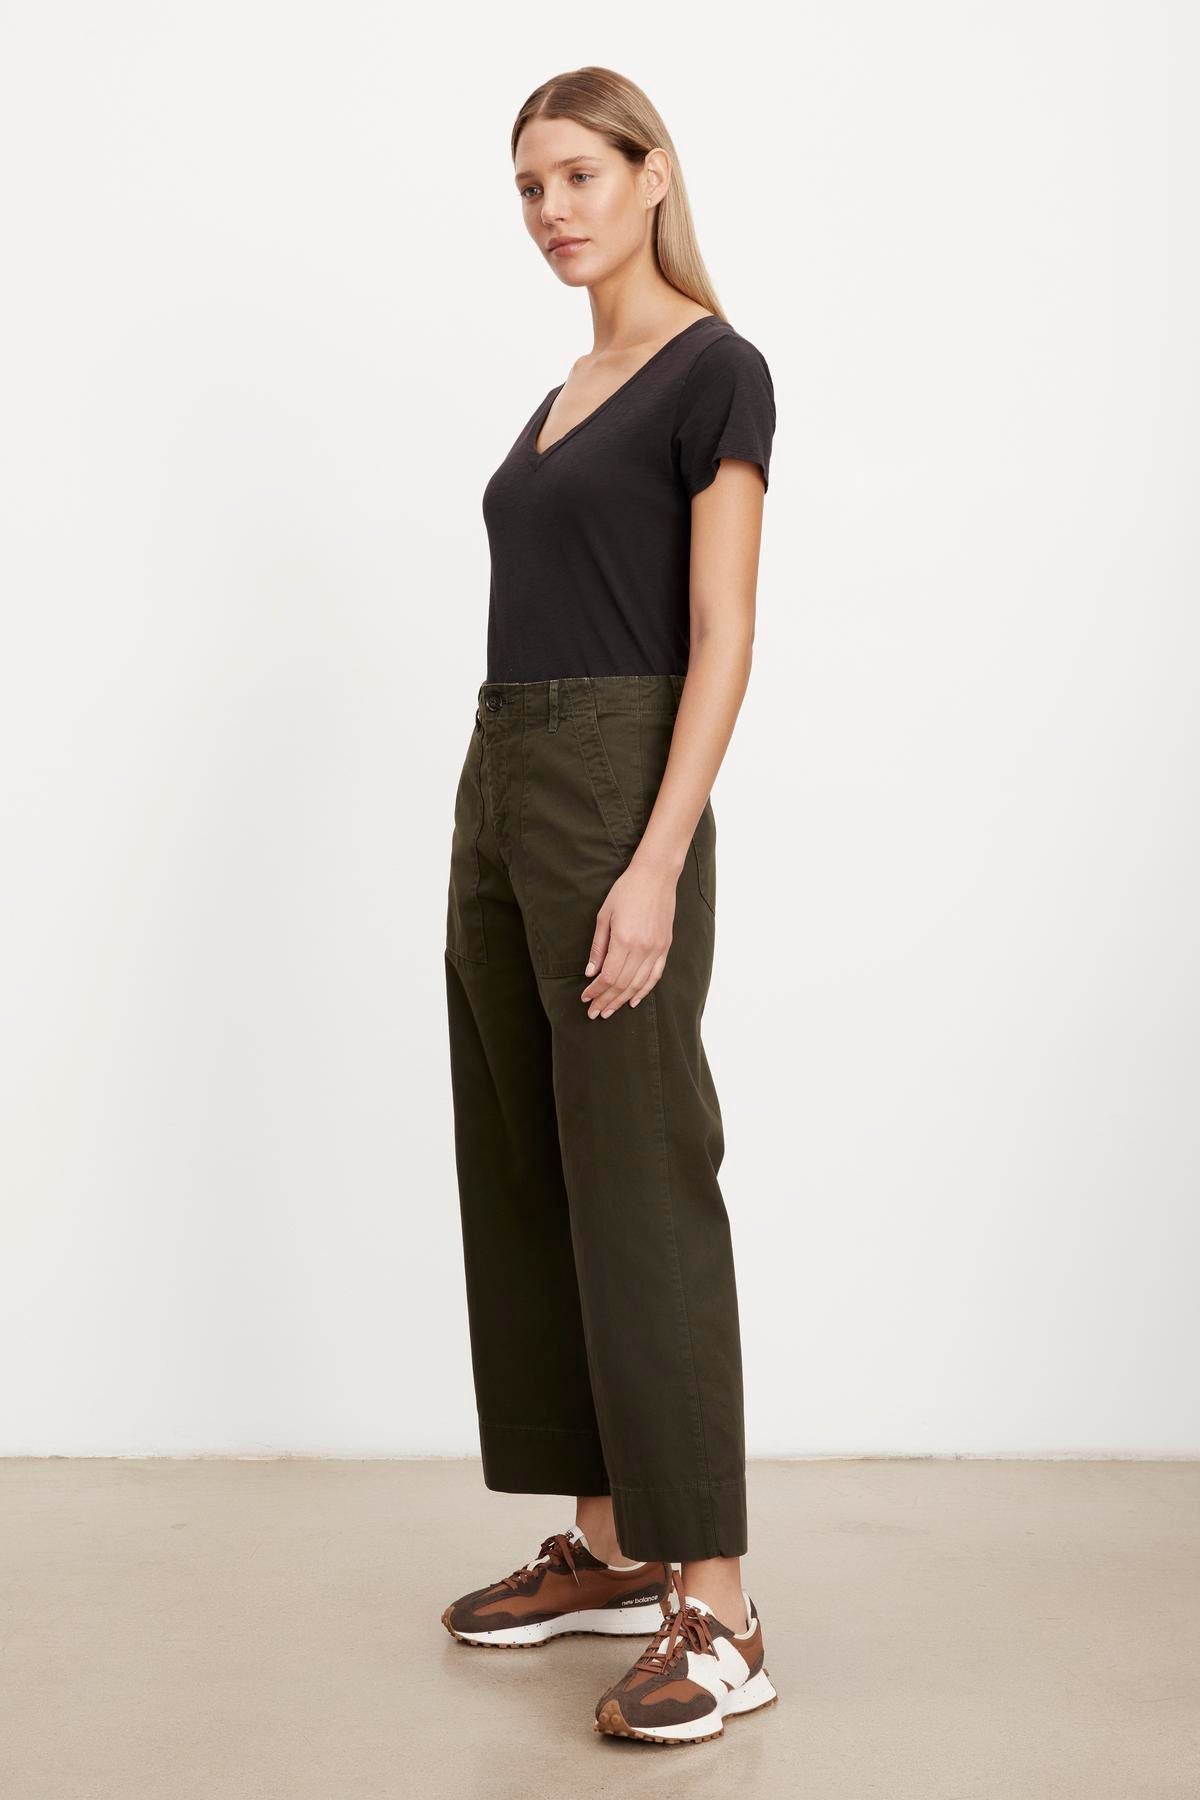 The model is wearing a slim top and MYA COTTON CANVAS PANT trousers in olive green from Velvet by Graham & Spencer.-36320657146049